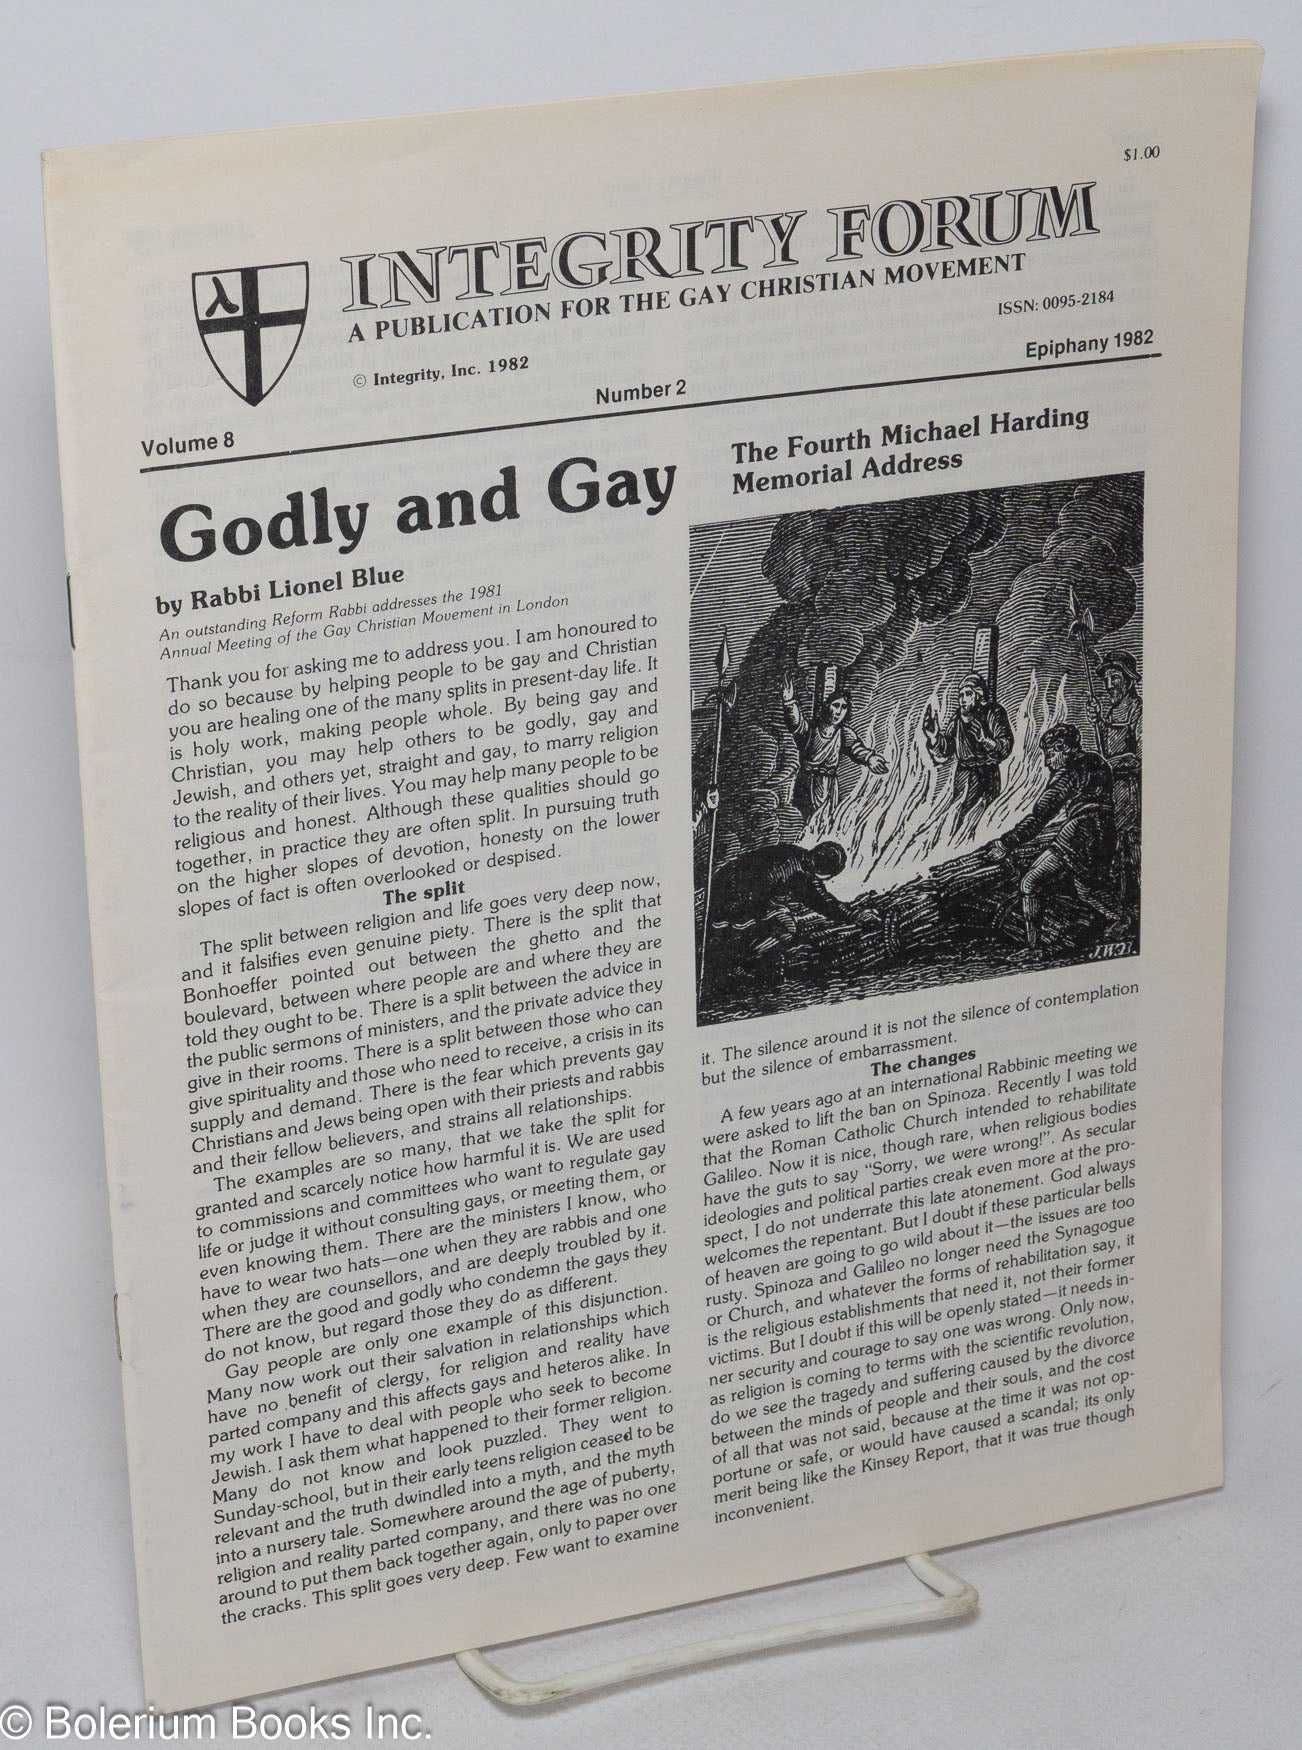 Integrity Forum: a journal for gay Episcopalians and their friends; vol. 8,  #2, Epiphany 1982: Godly & gay | Rev. Grant M. Gallup, Rev. Richard Younge  Rabbi